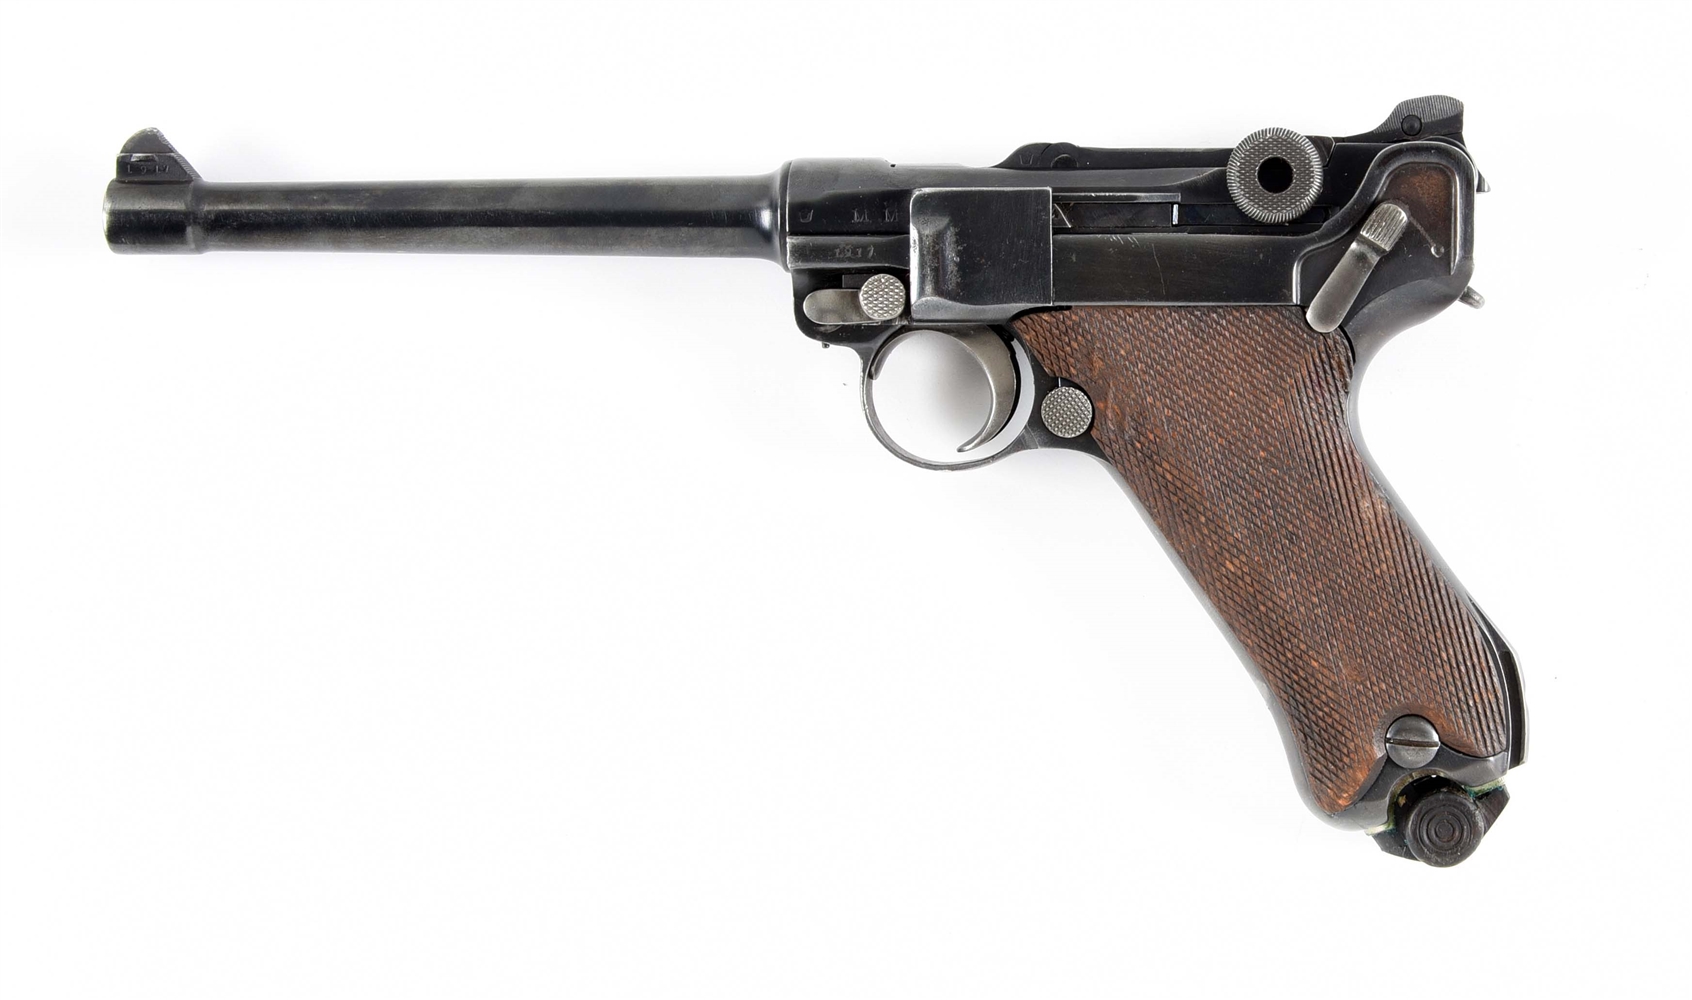 (C) REFINISHED IMPERIAL GERMAN WORLD WAR I DWM "1917" DATE NAVY LUGER SEMI-AUTOMATIC PISTOL.